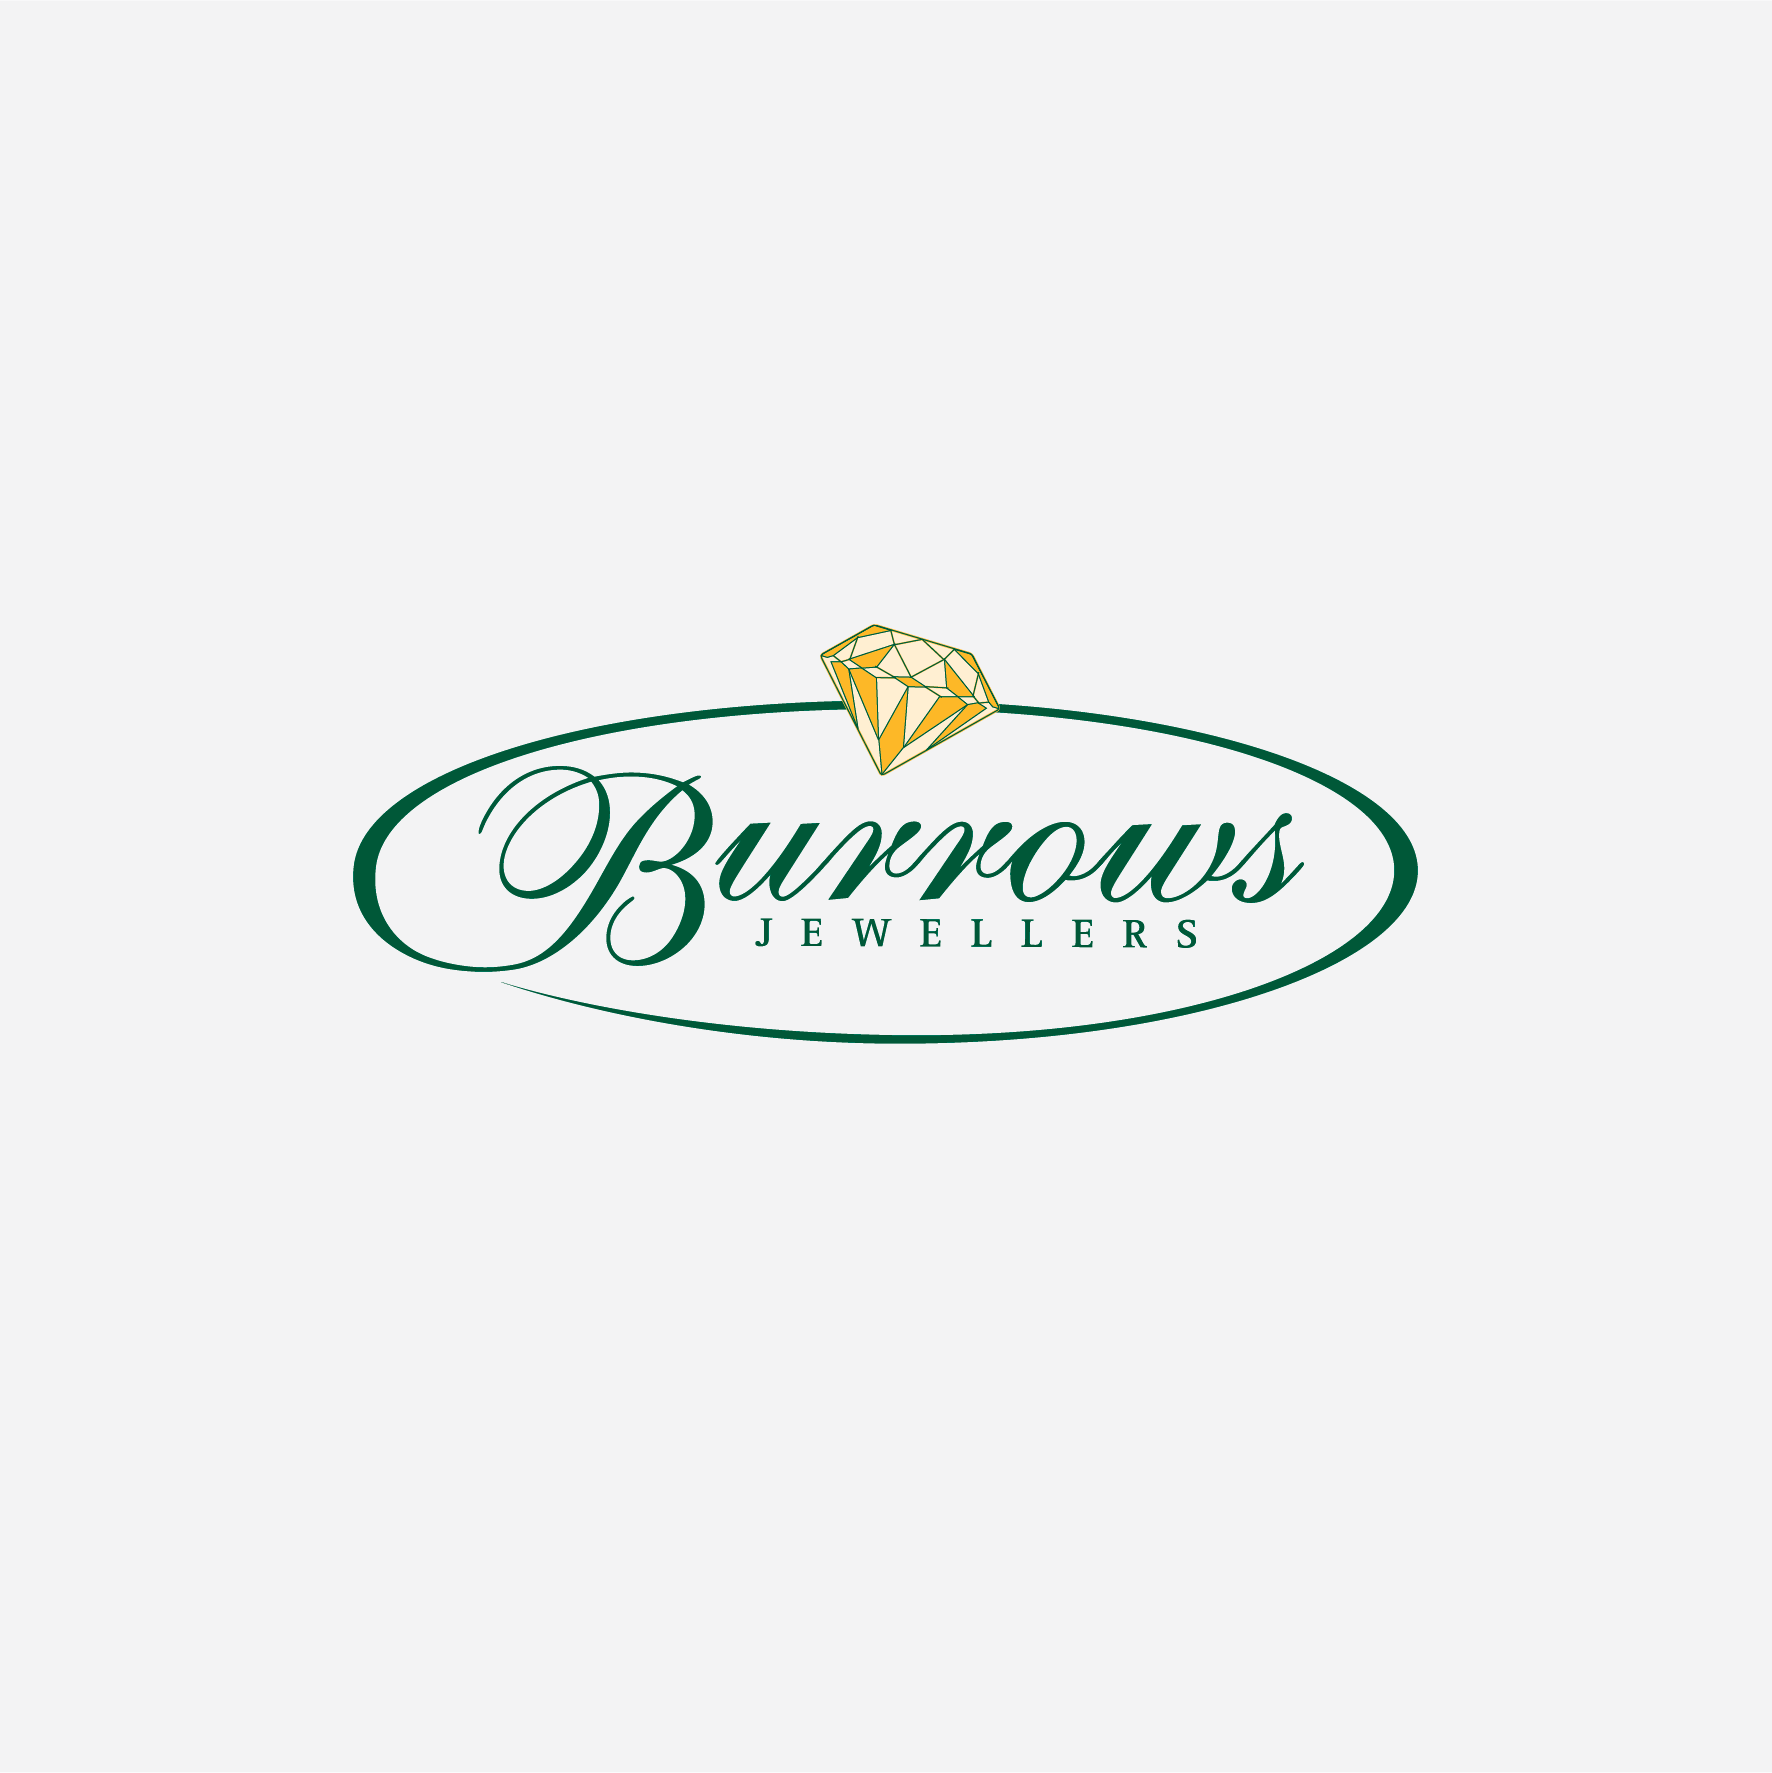 Burrows Jewellers logo.png